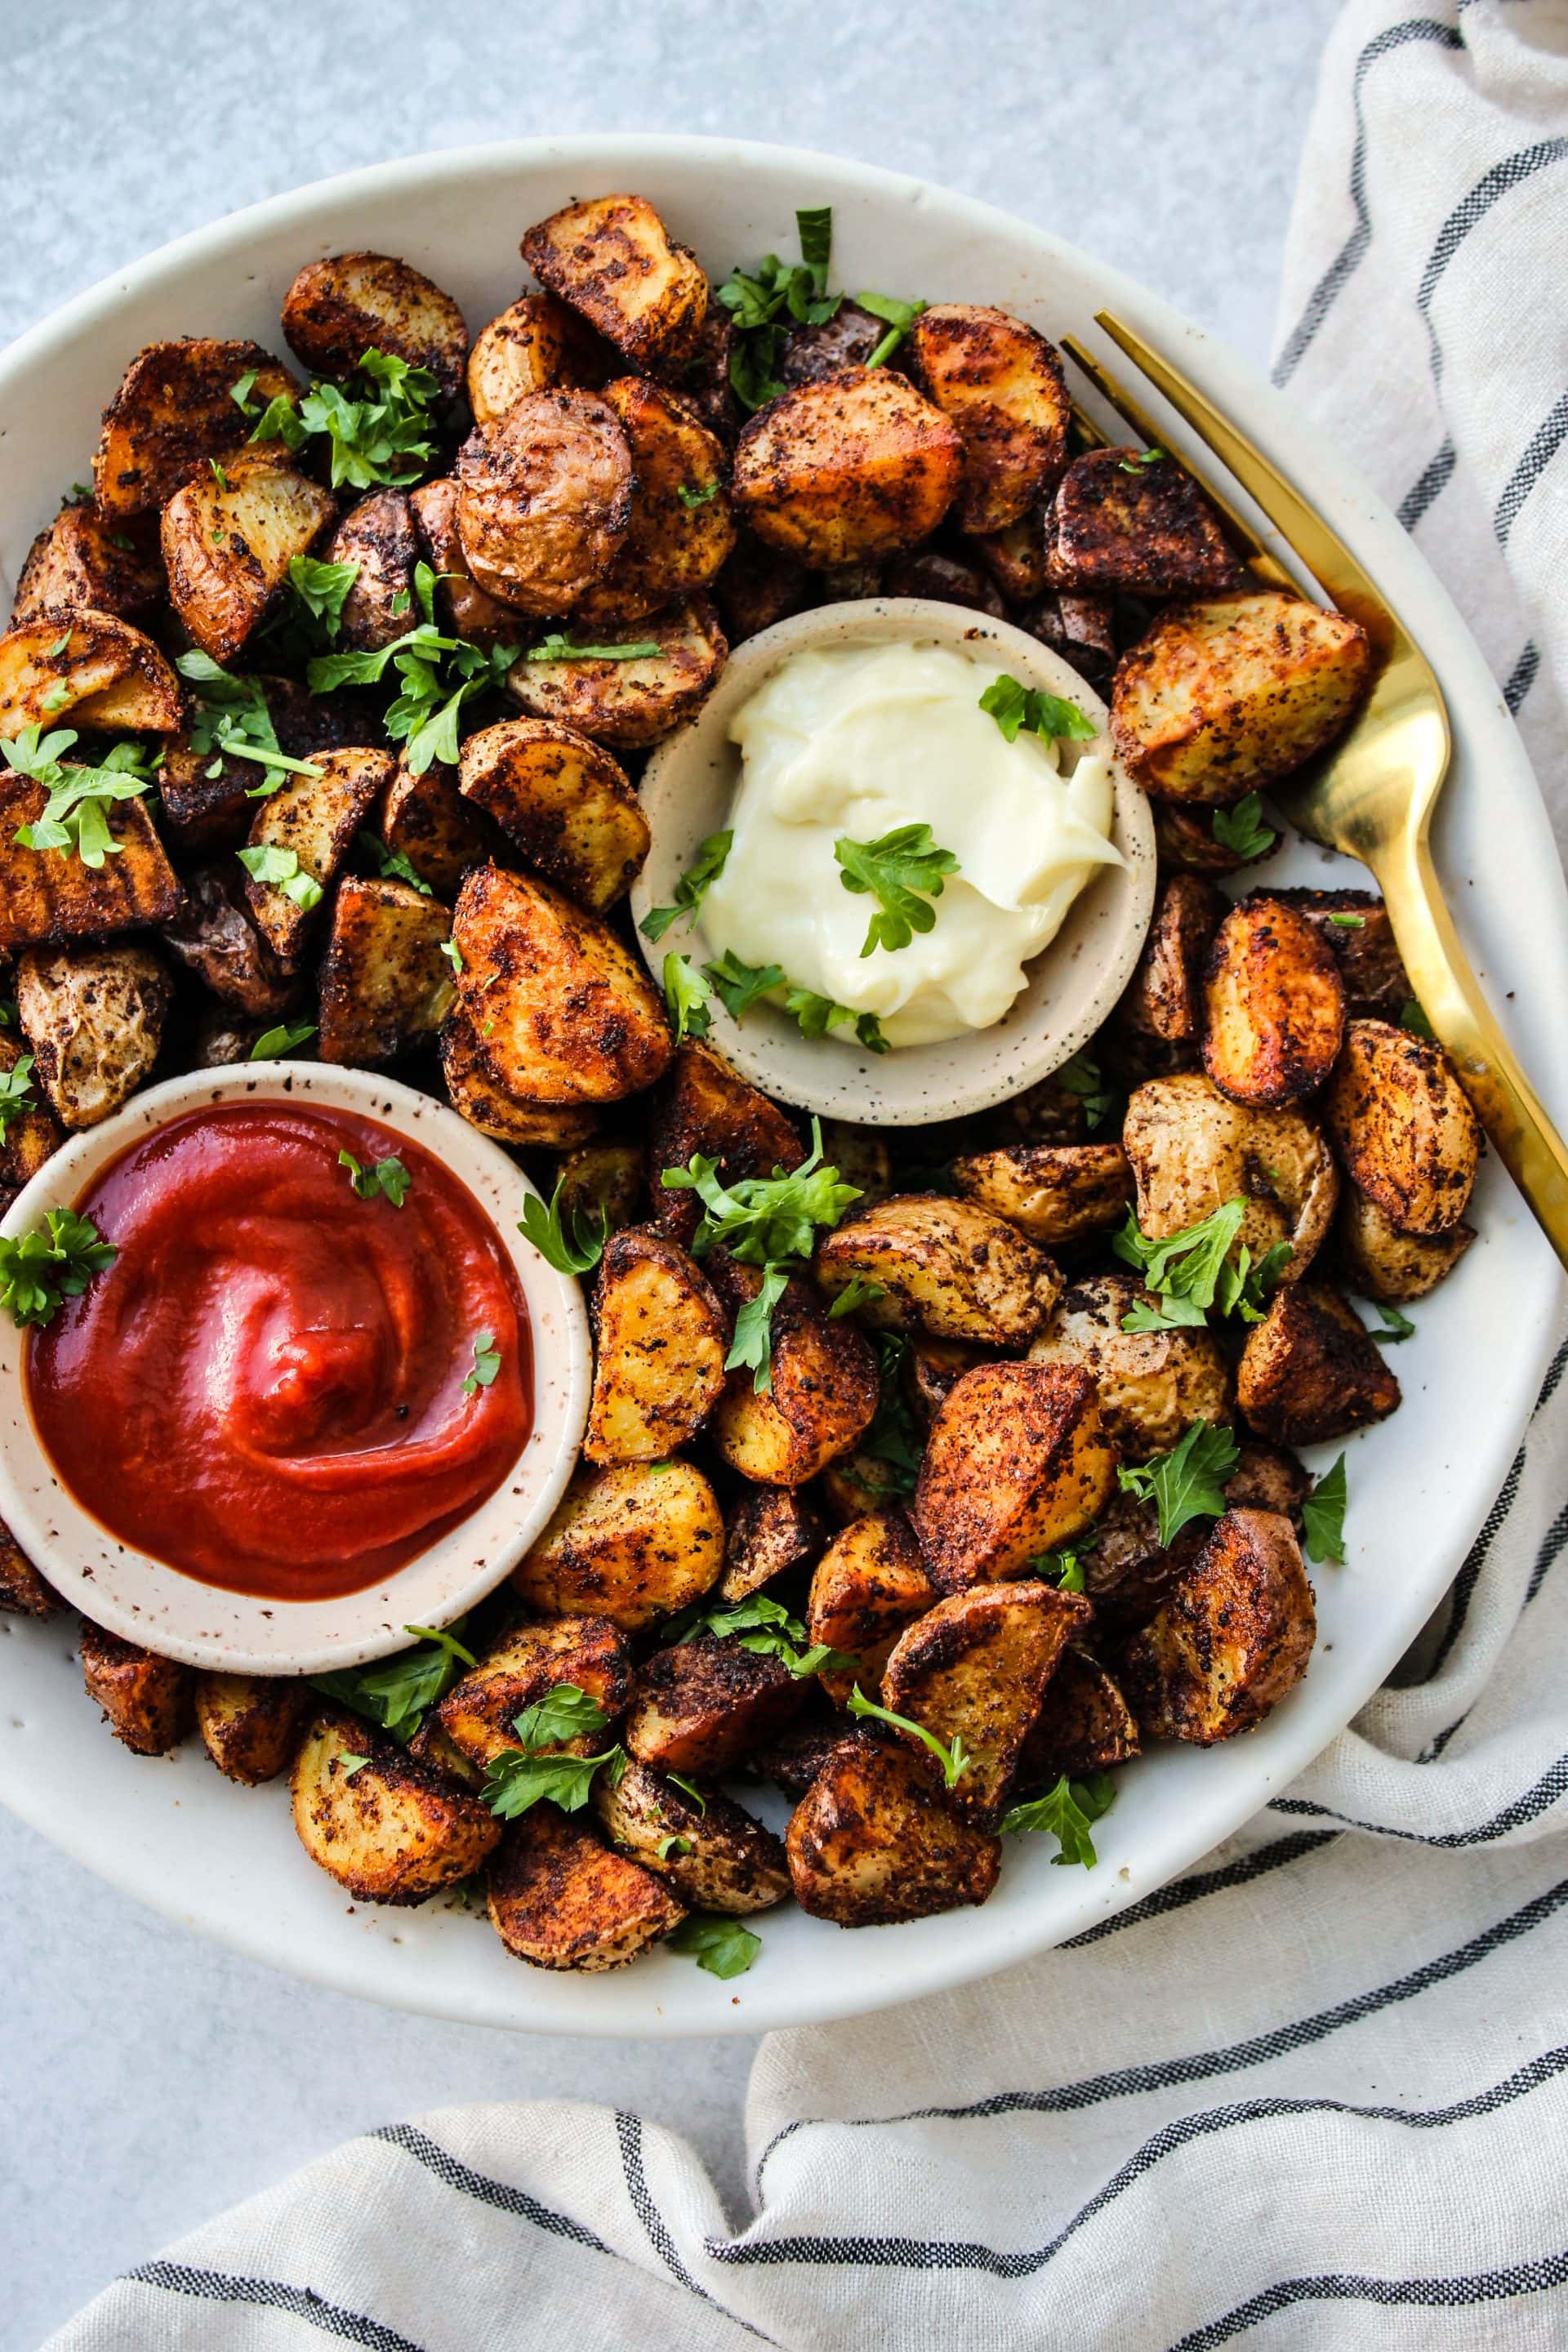 Lemon-Roasted Potatoes, Chicken and Spinach with Tzatziki